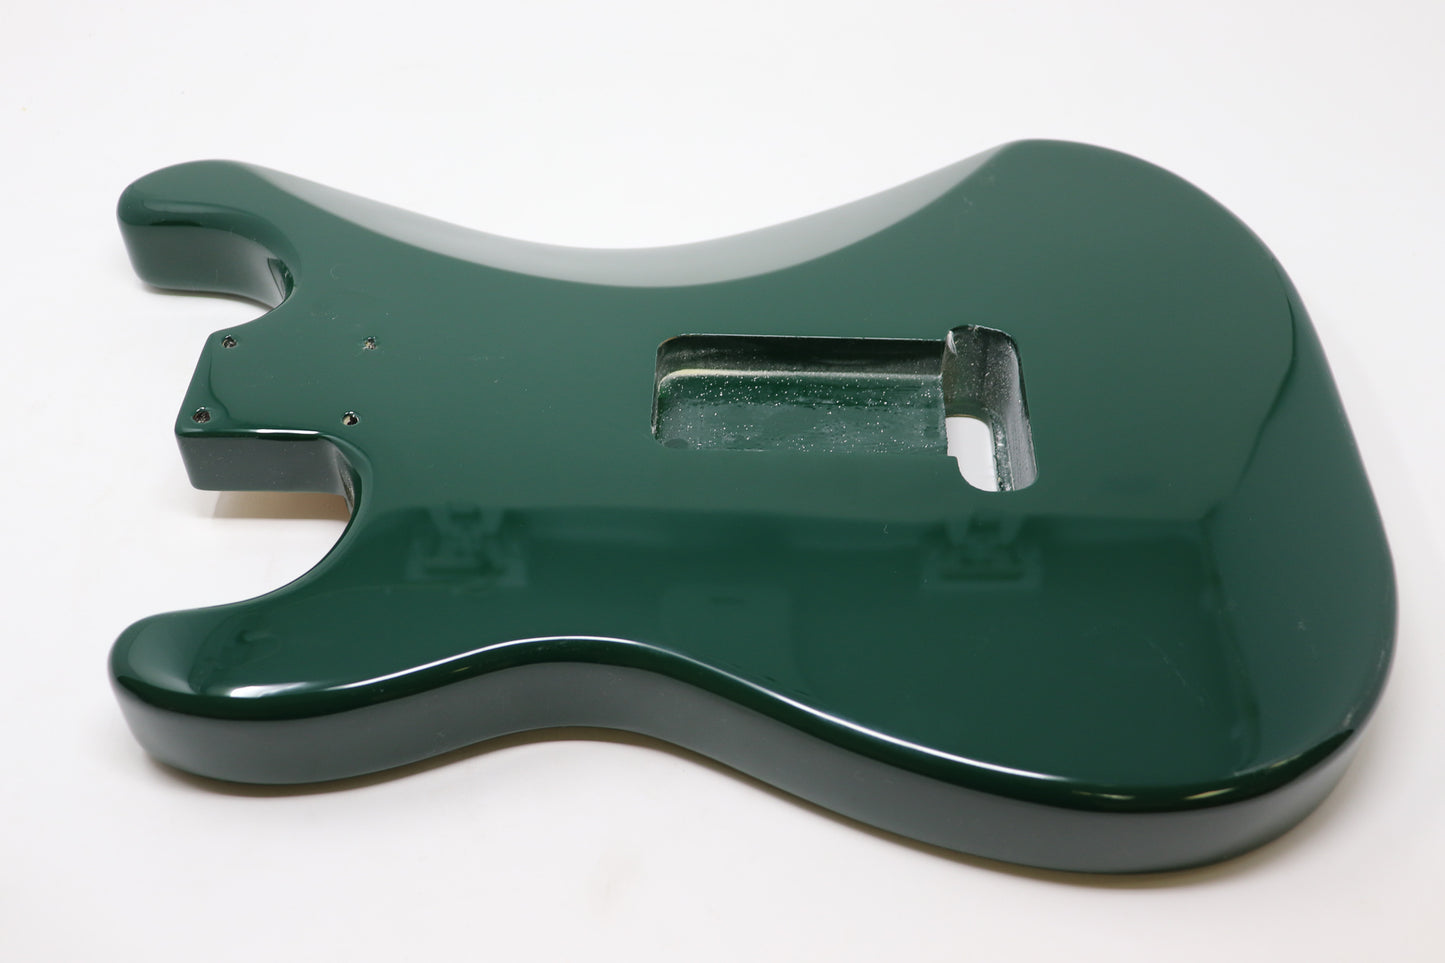 AE Guitars® S-Style Alder Replacement Guitar Body British Race Green